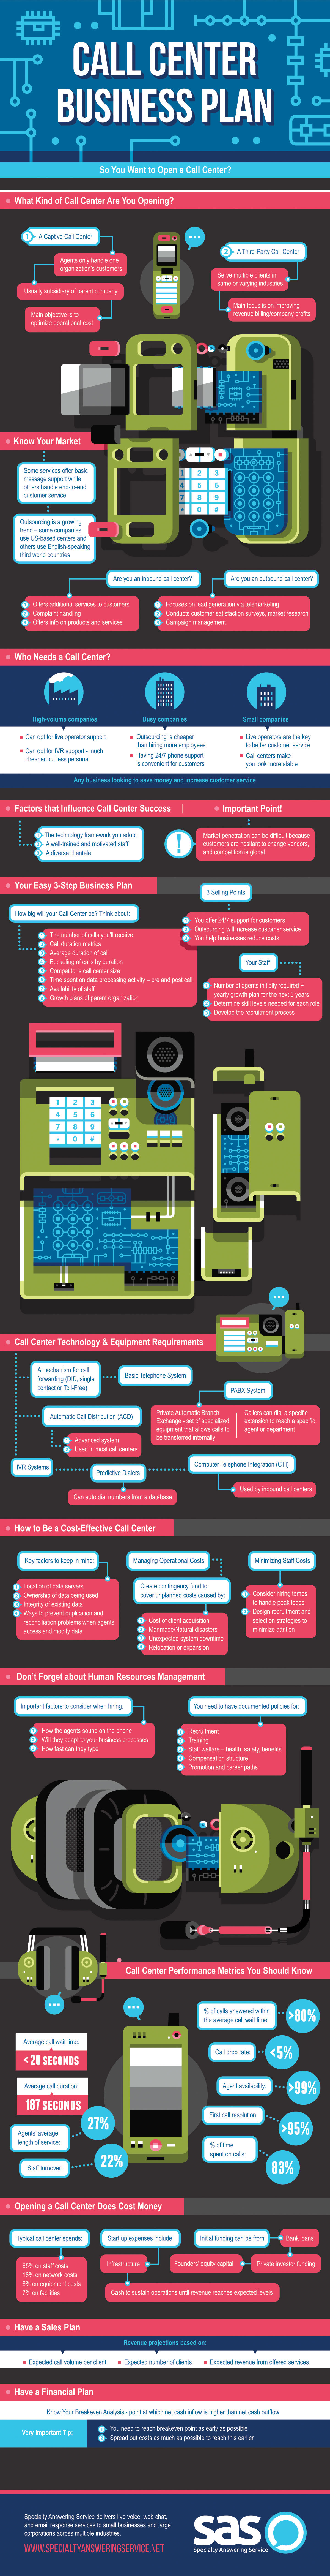 Infographic: How to Start a Call Center